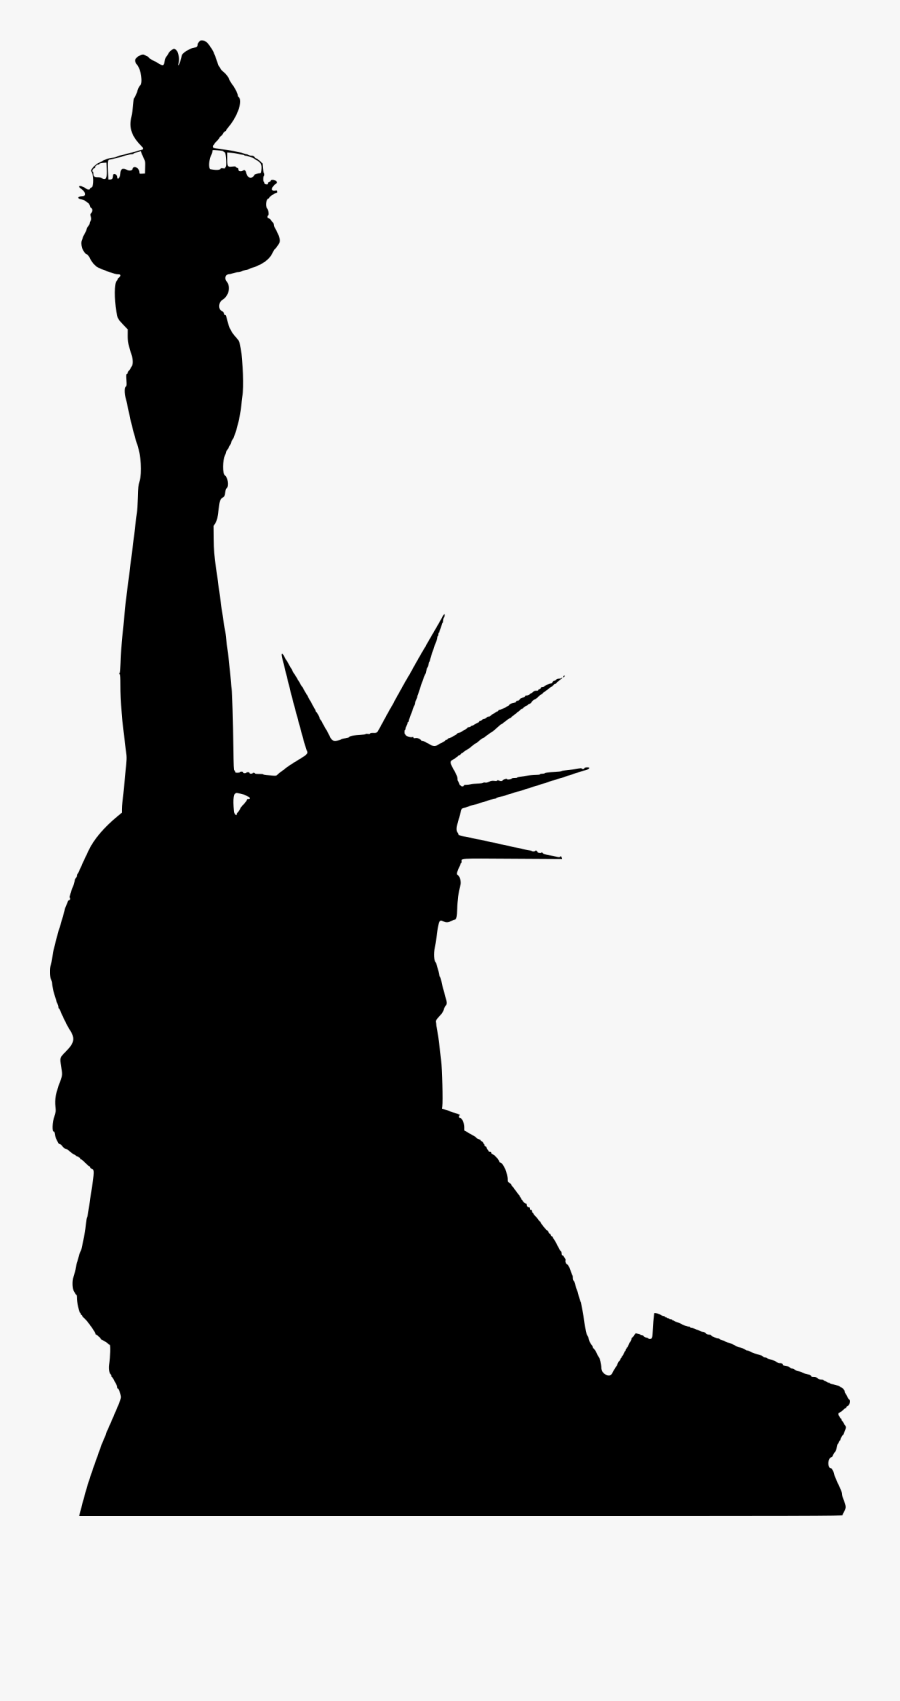 Statue Of Liberty - Statue Of Liberty Silhouette Clipart, Transparent Clipart